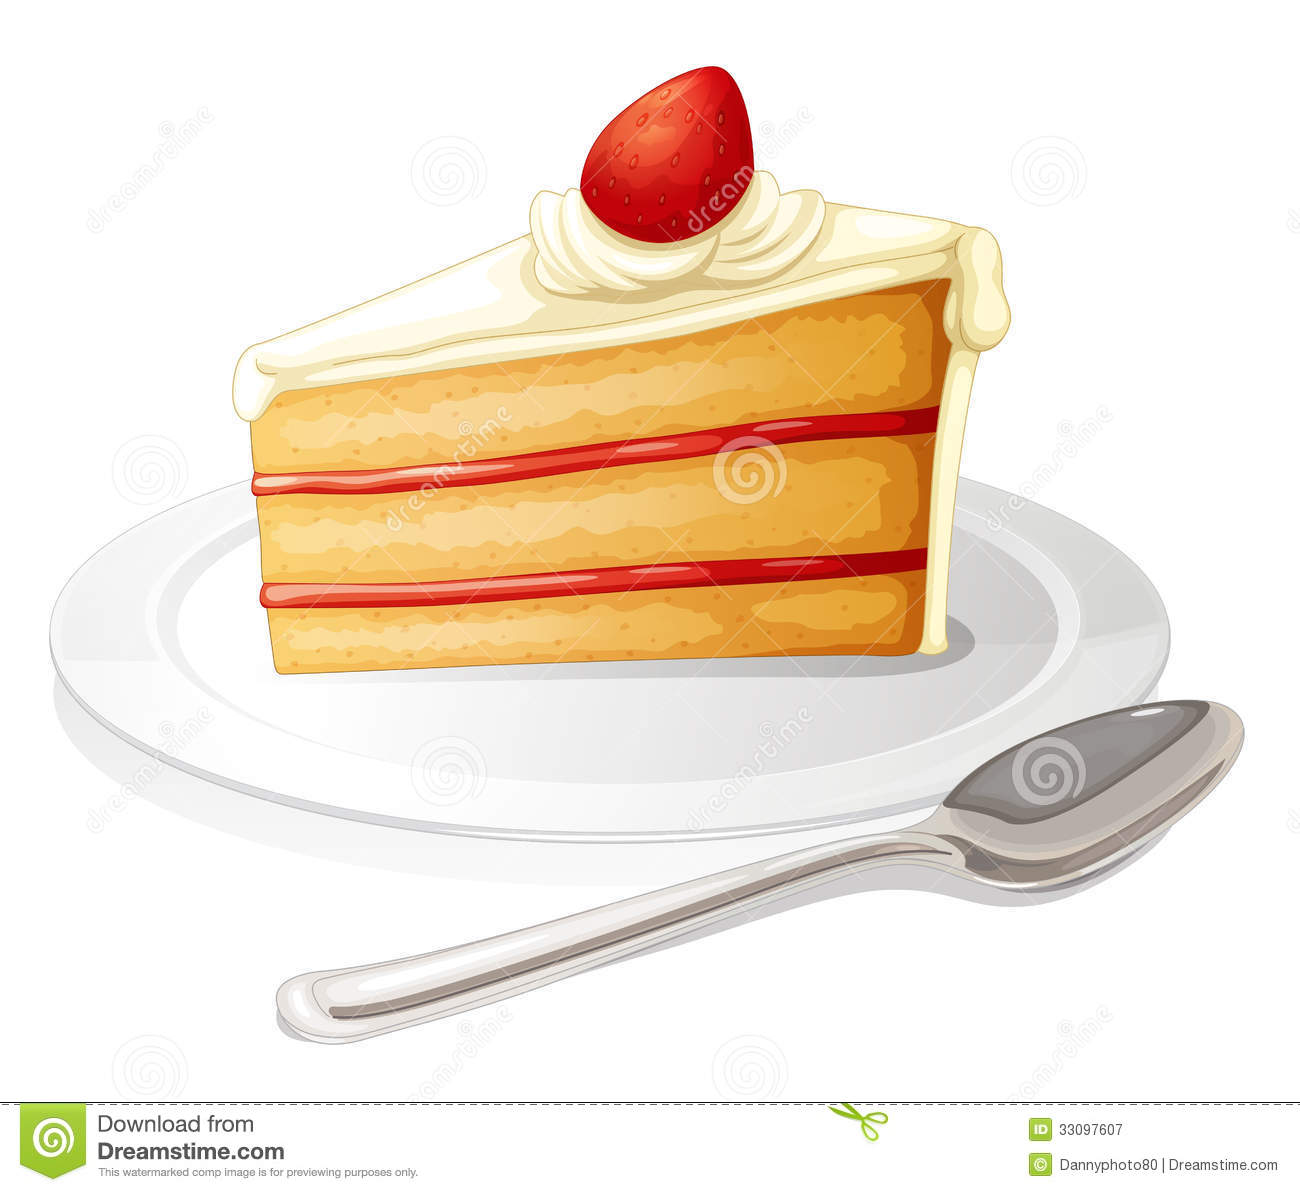 Illustration Of A Slice Of Cake With White Icing In A Plate On A White